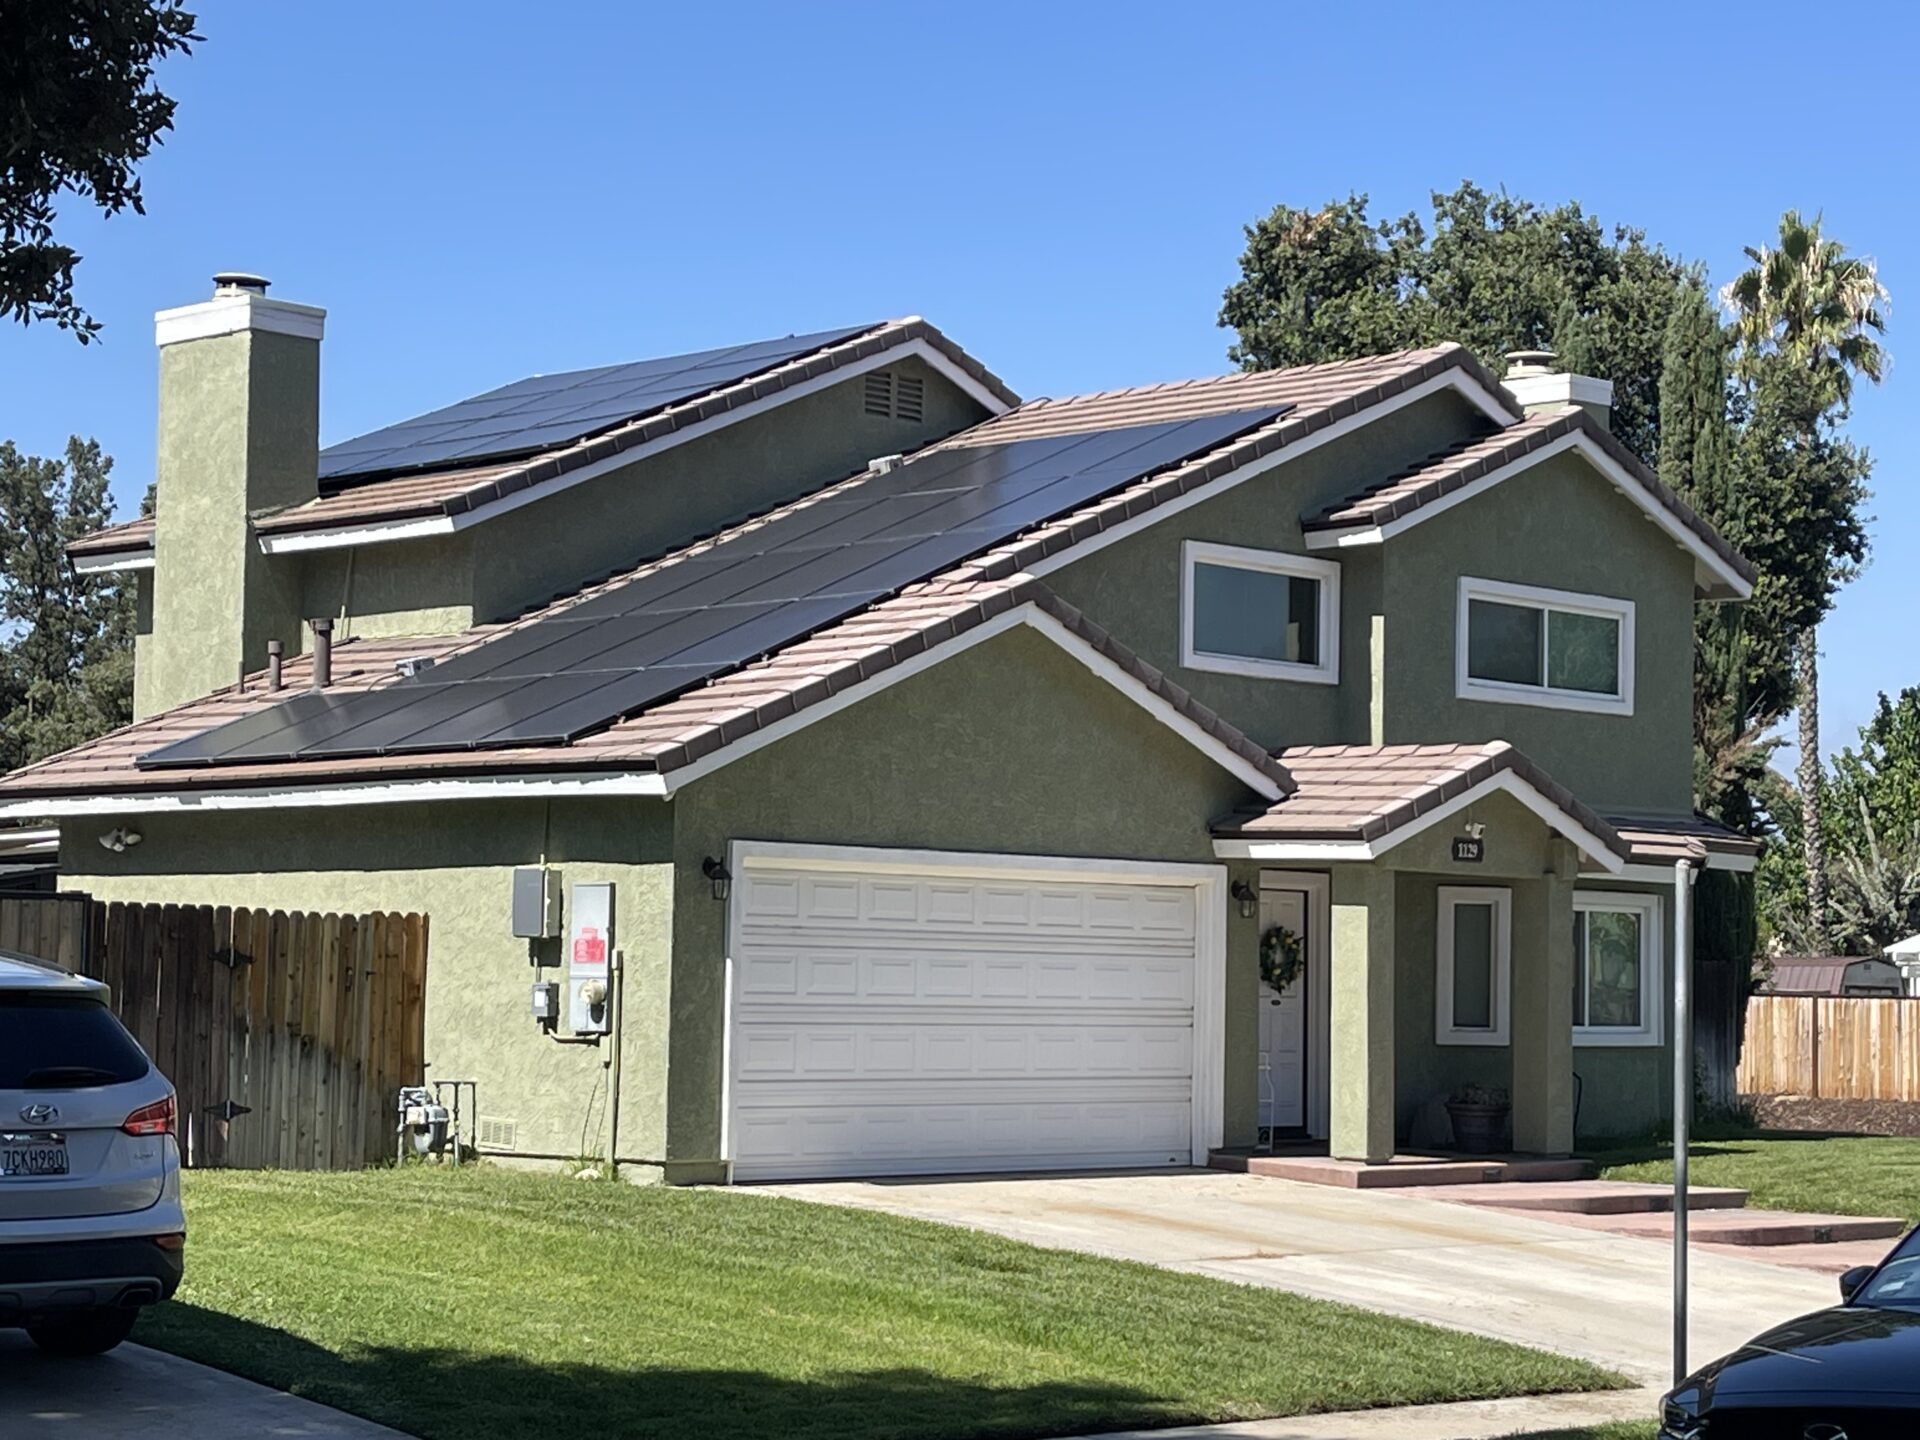 Strode Family Home with a complete exterior makeover, new paint remove old wood siding, new roof, new solar, and a new full screened in patio in the backyard. House is the nicest on the street. This home is located on the north side of Redlands, Ca and it is amazing.